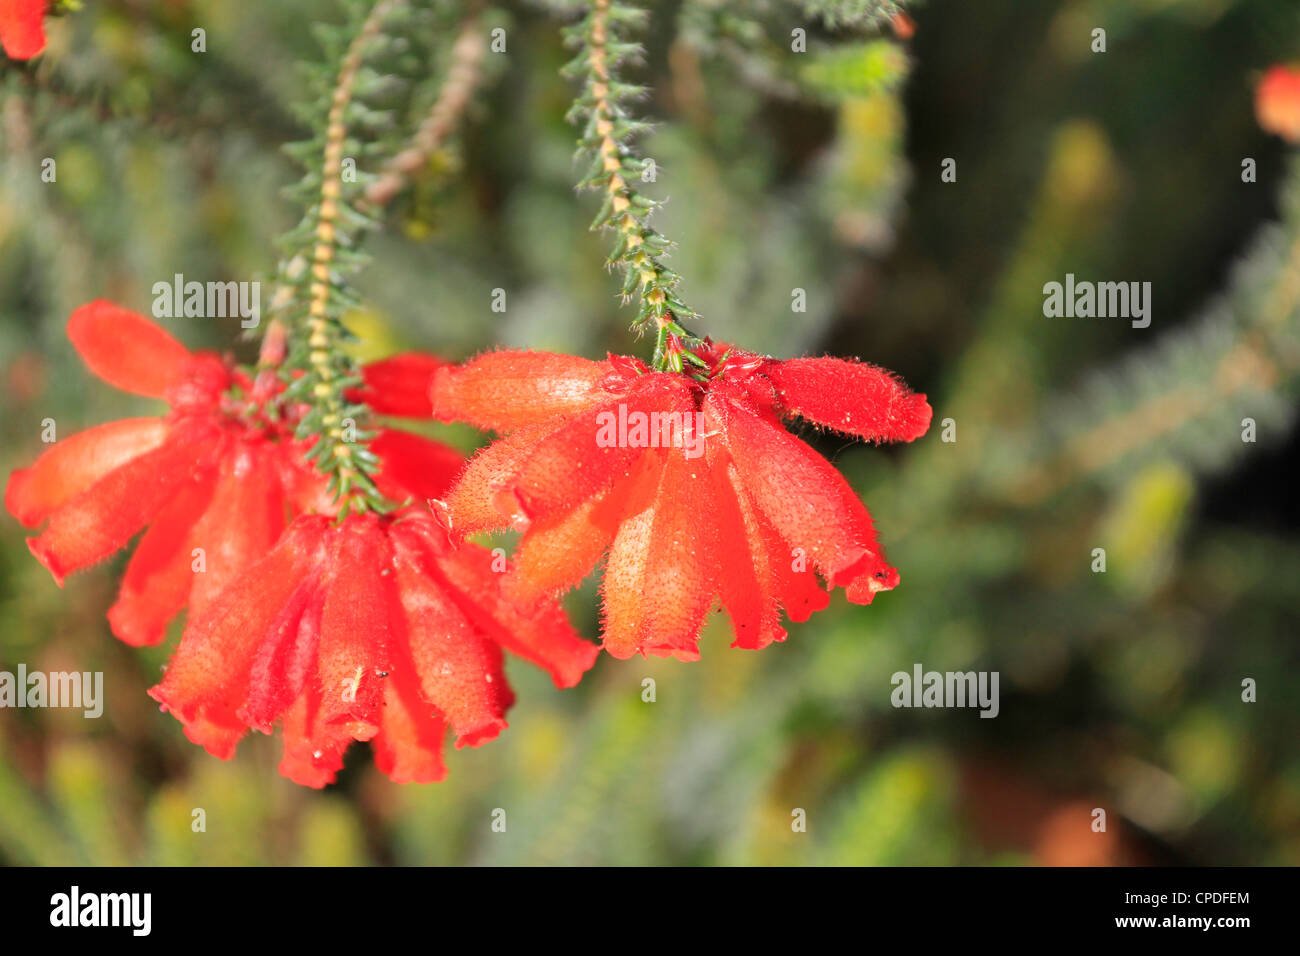 Red Erica cerinthoides flower, also known as Red Hairy Heath and Rooihaartjie. Stock Photo